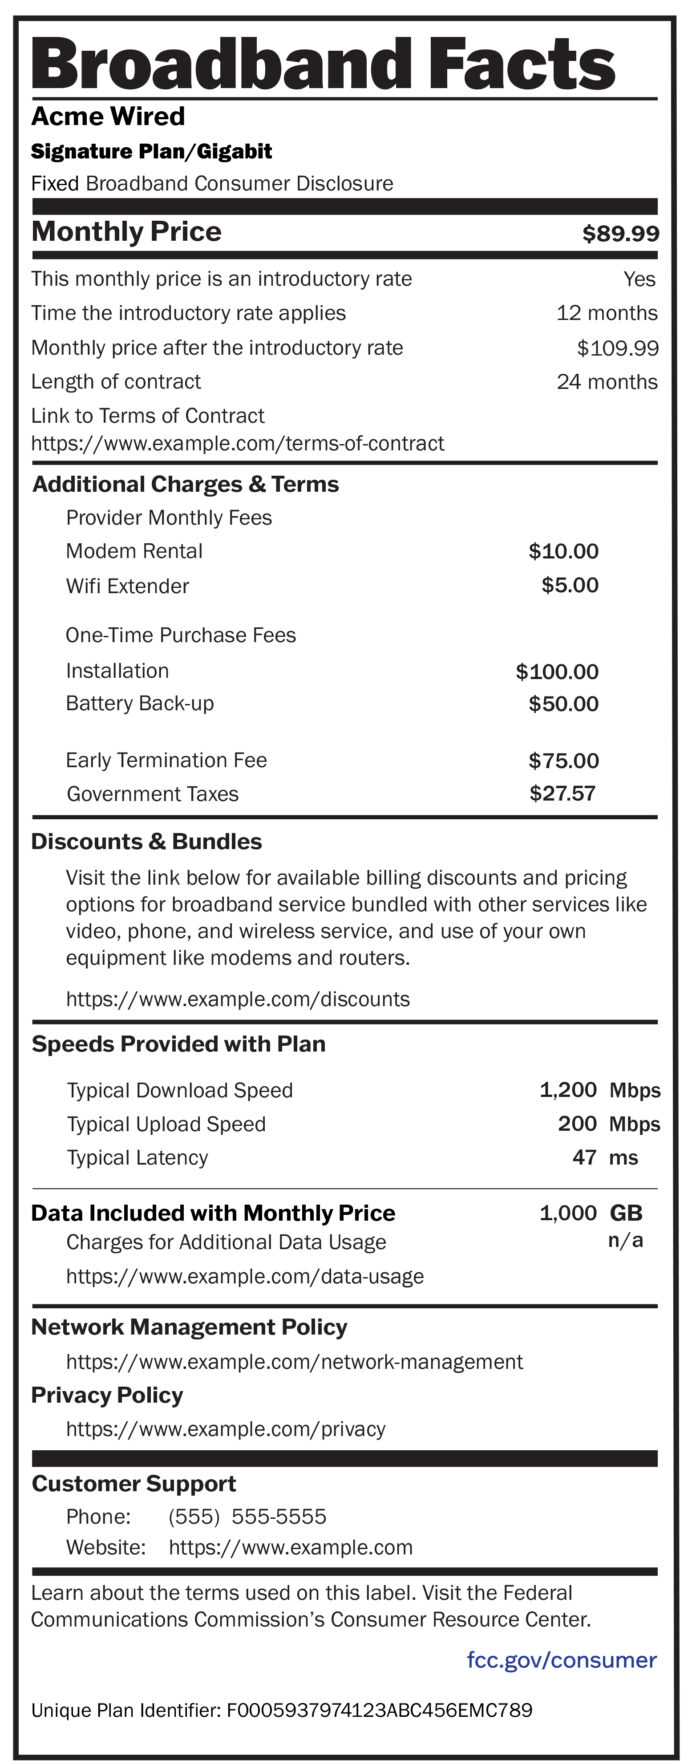 What looks like a nutrition label is shown, but instead of the standard "Nutrition Facts" at the top of the label, it instead reads, "Broadband Facts." Underneath are a long list of facts, including "Monthly Price," "Additional Charges & Terms," "Discounts & Bundles," etc.